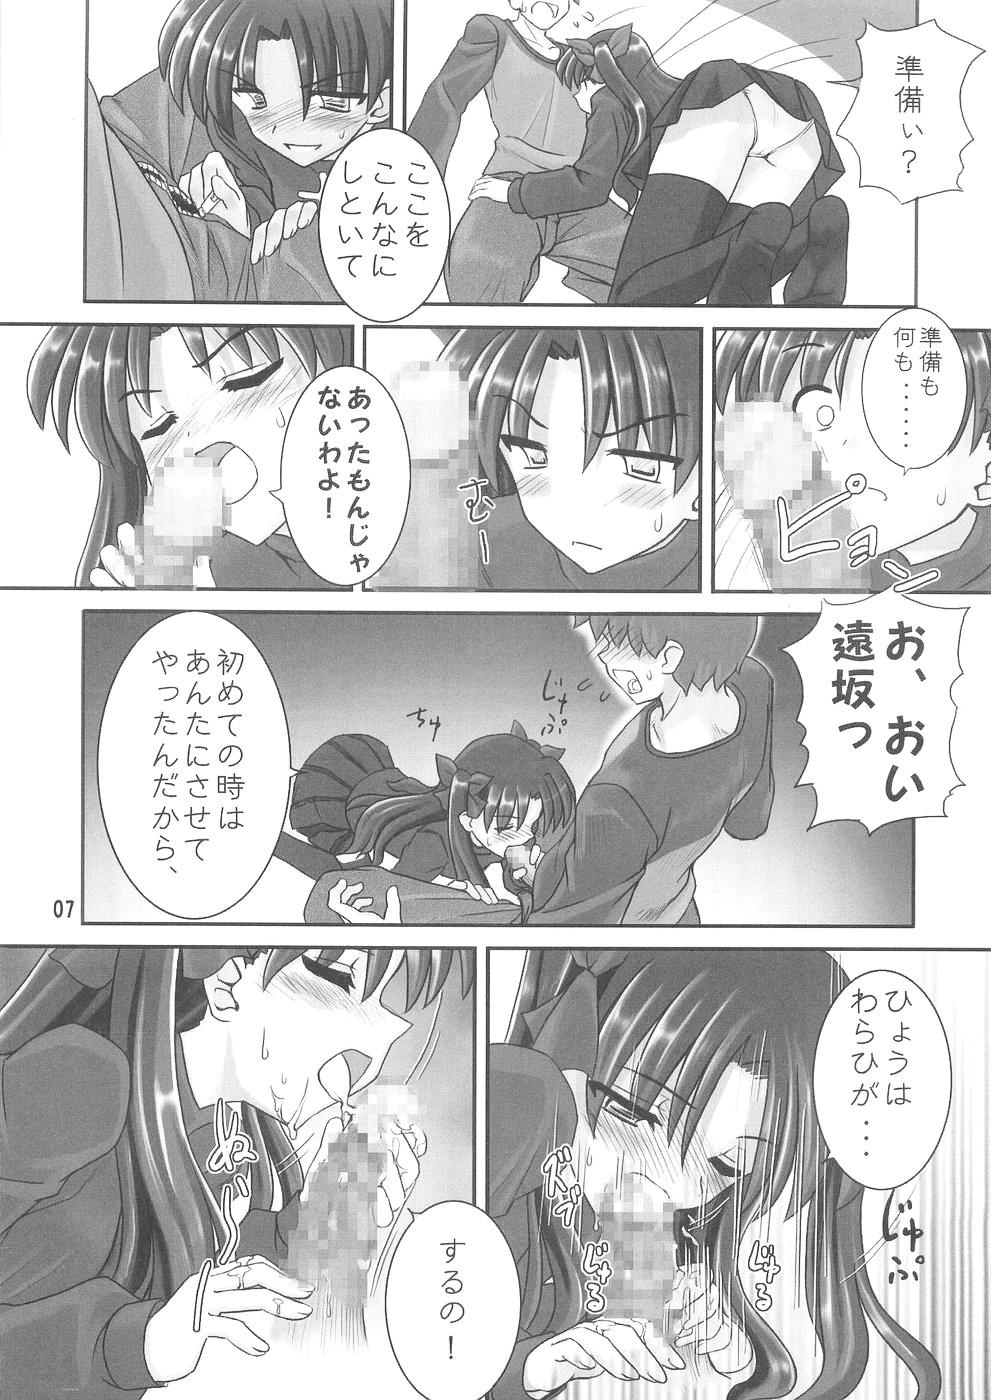 Stepsister Moon Marguerite - Fate stay night Sislovesme - Page 6